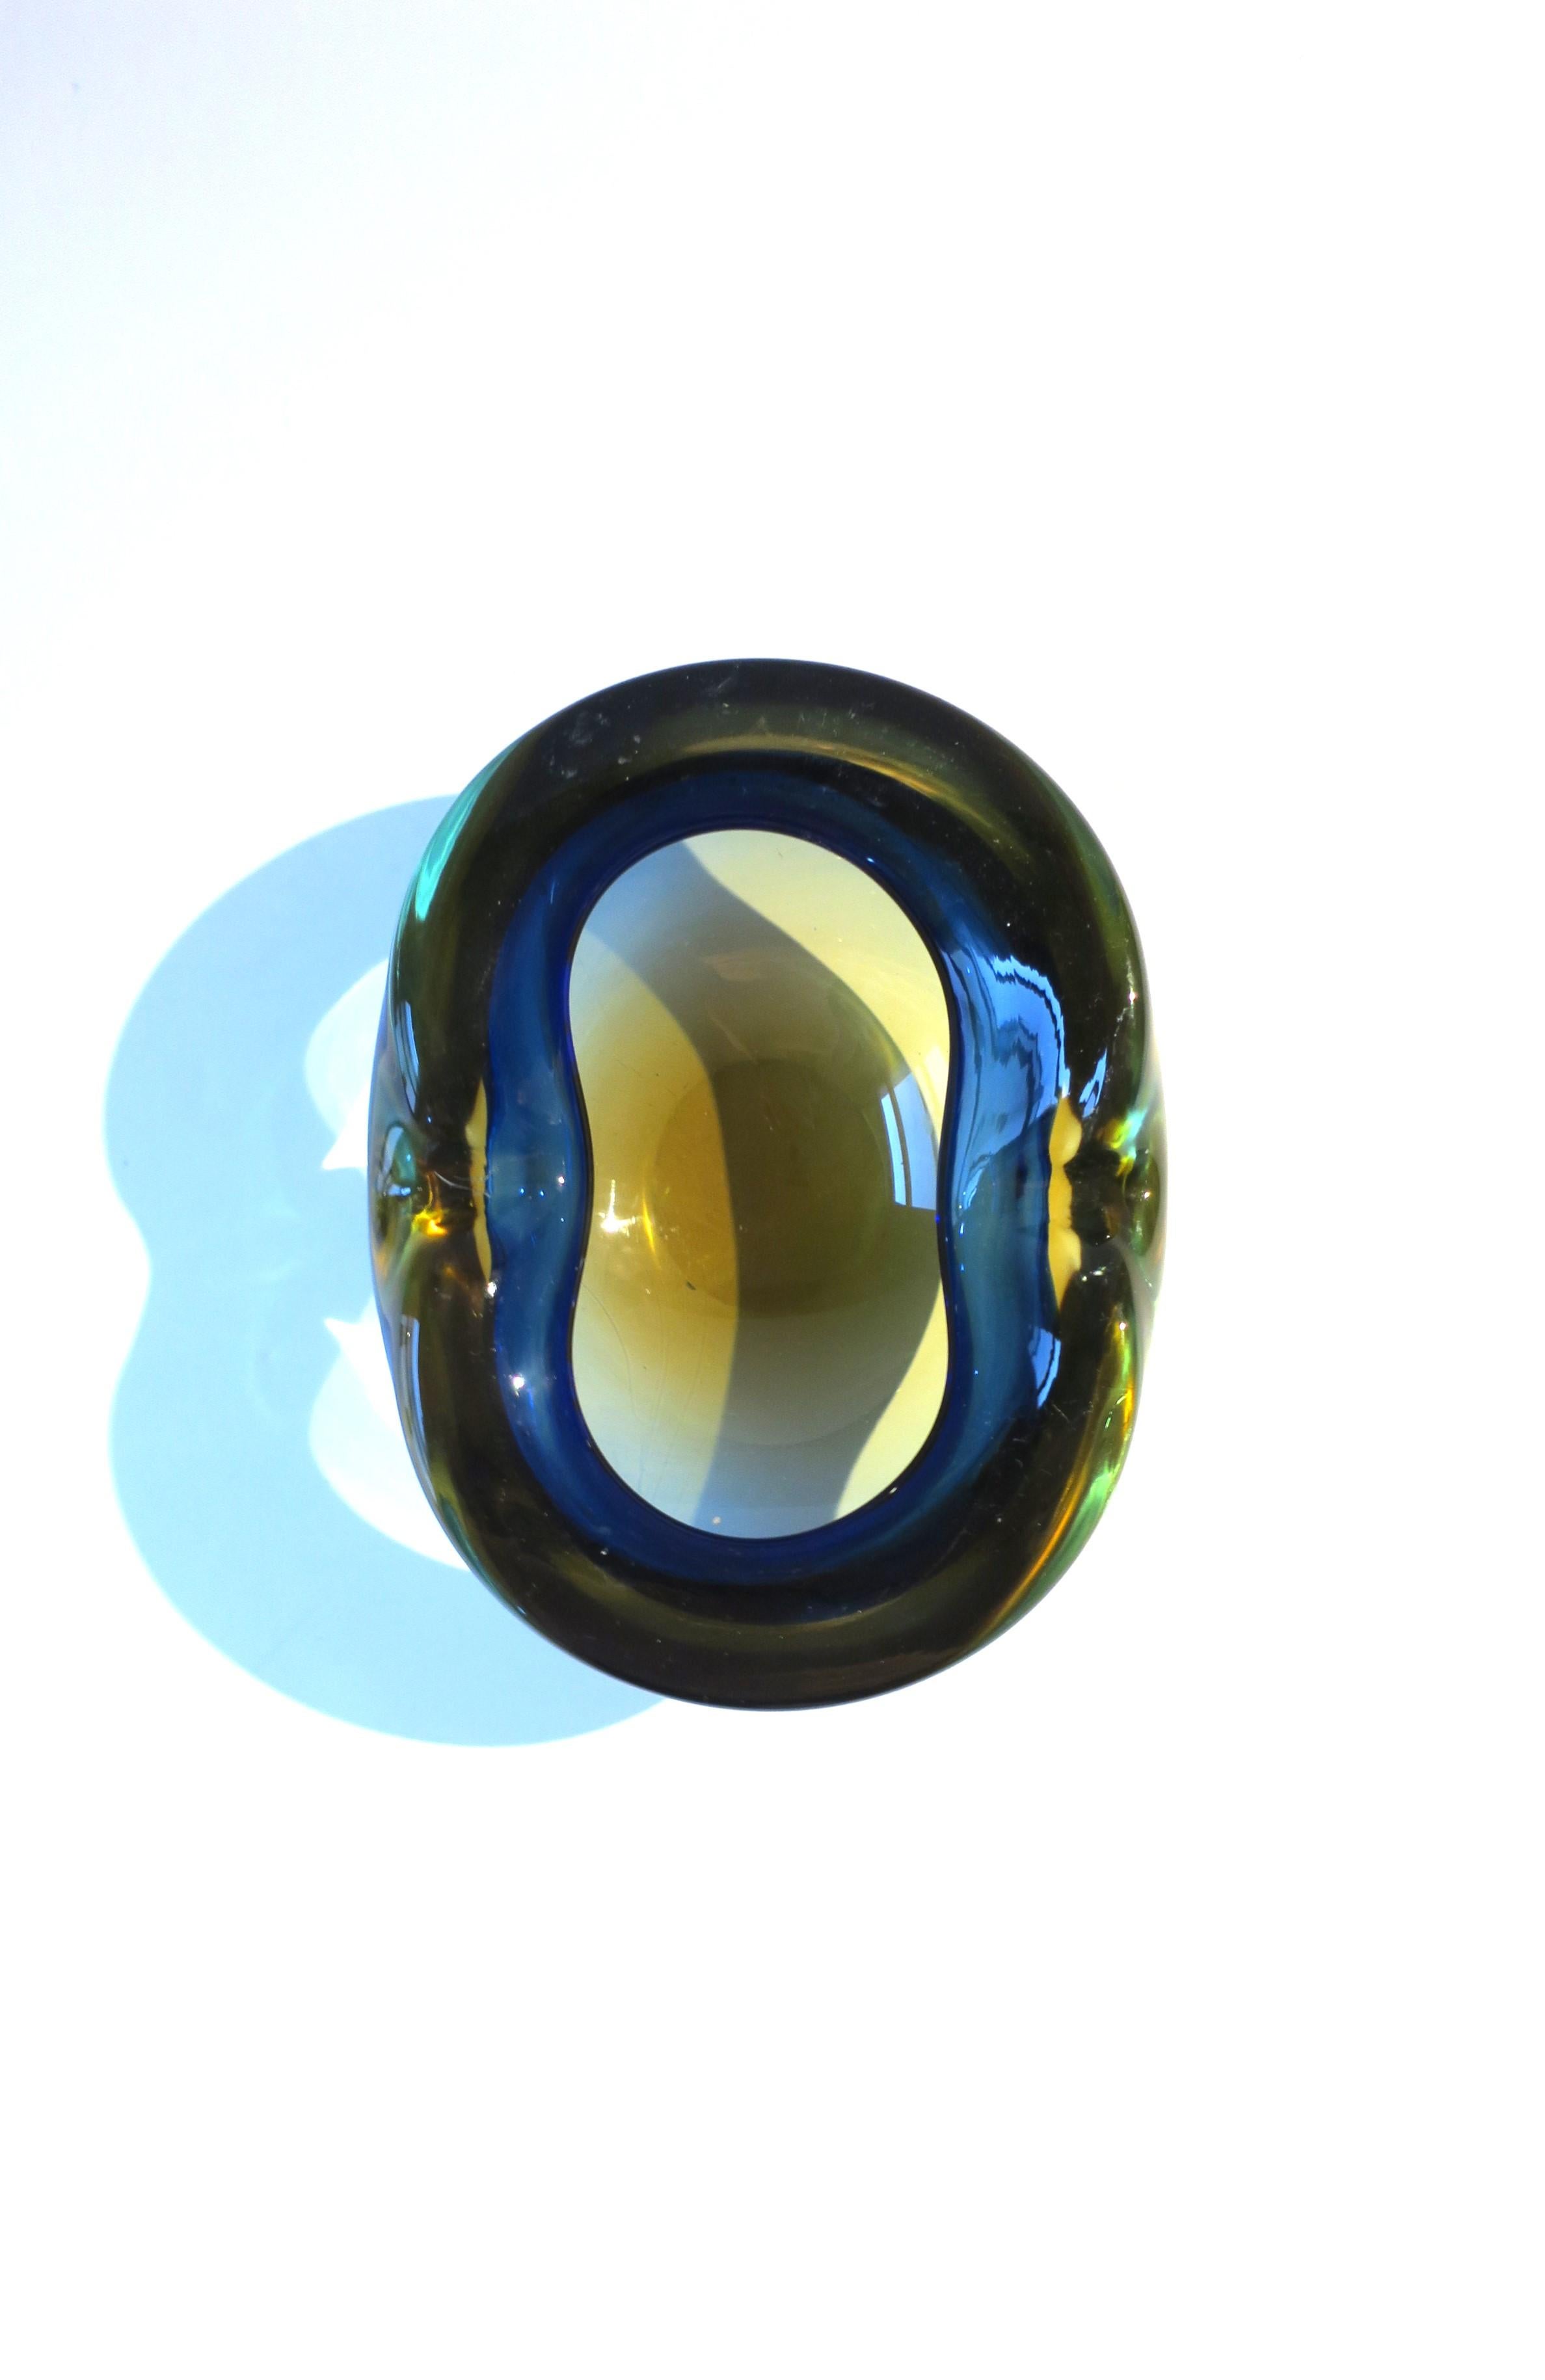 A substantial vintage Italian Murano hand blown Sommerso art glass bowl or ashtray in the style of artist Alfredo Barbini, Midcentury Modern period, circa 1950s, 1960s, Italy. Piece is dark blue, yellow and transparent/clear art glass, oval in